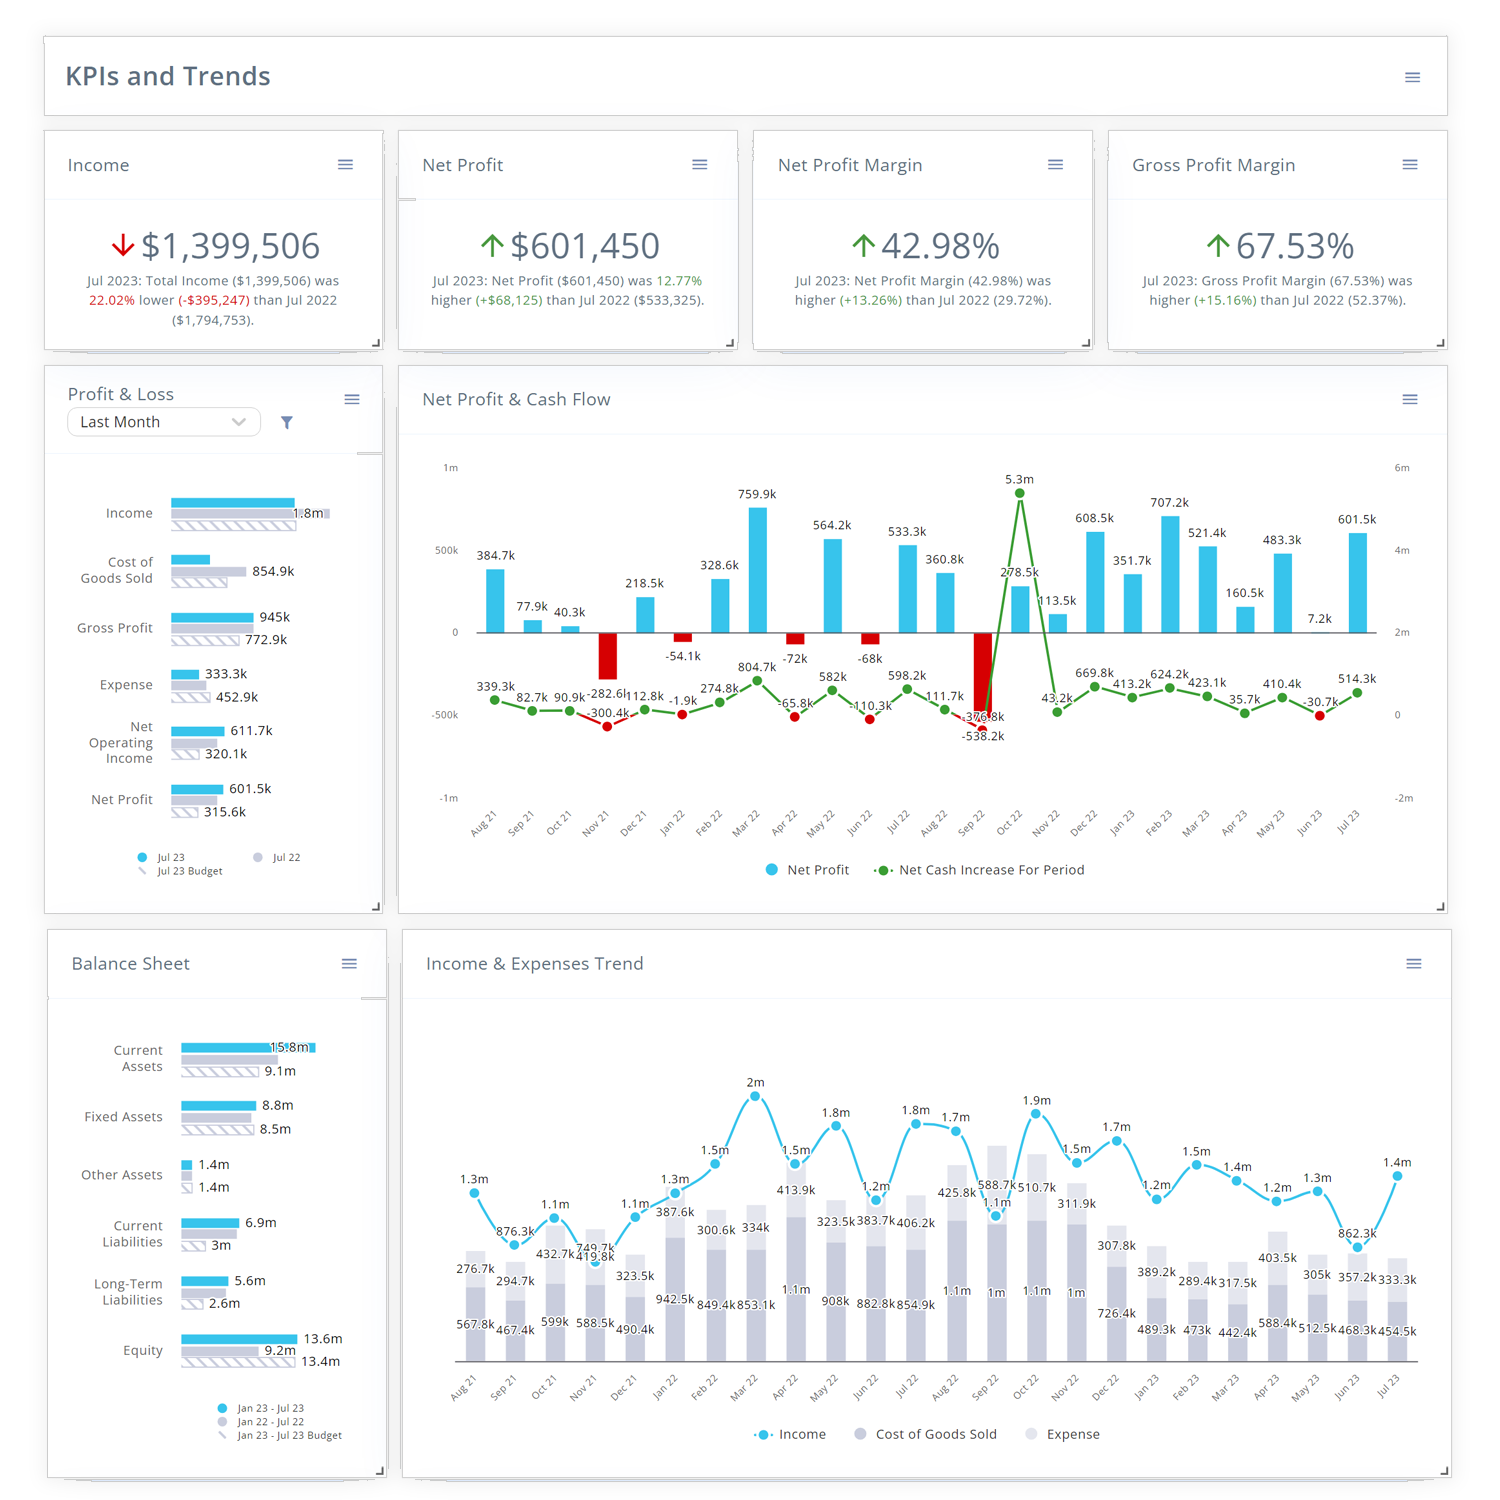 Enhance your services with consistent, data-rich reports that stay current. Provide comprehensive and shareable visuals on most recent financial performance. Our intelligent spreadsheet auto-updates with changing time periods, removing manual adjustments.